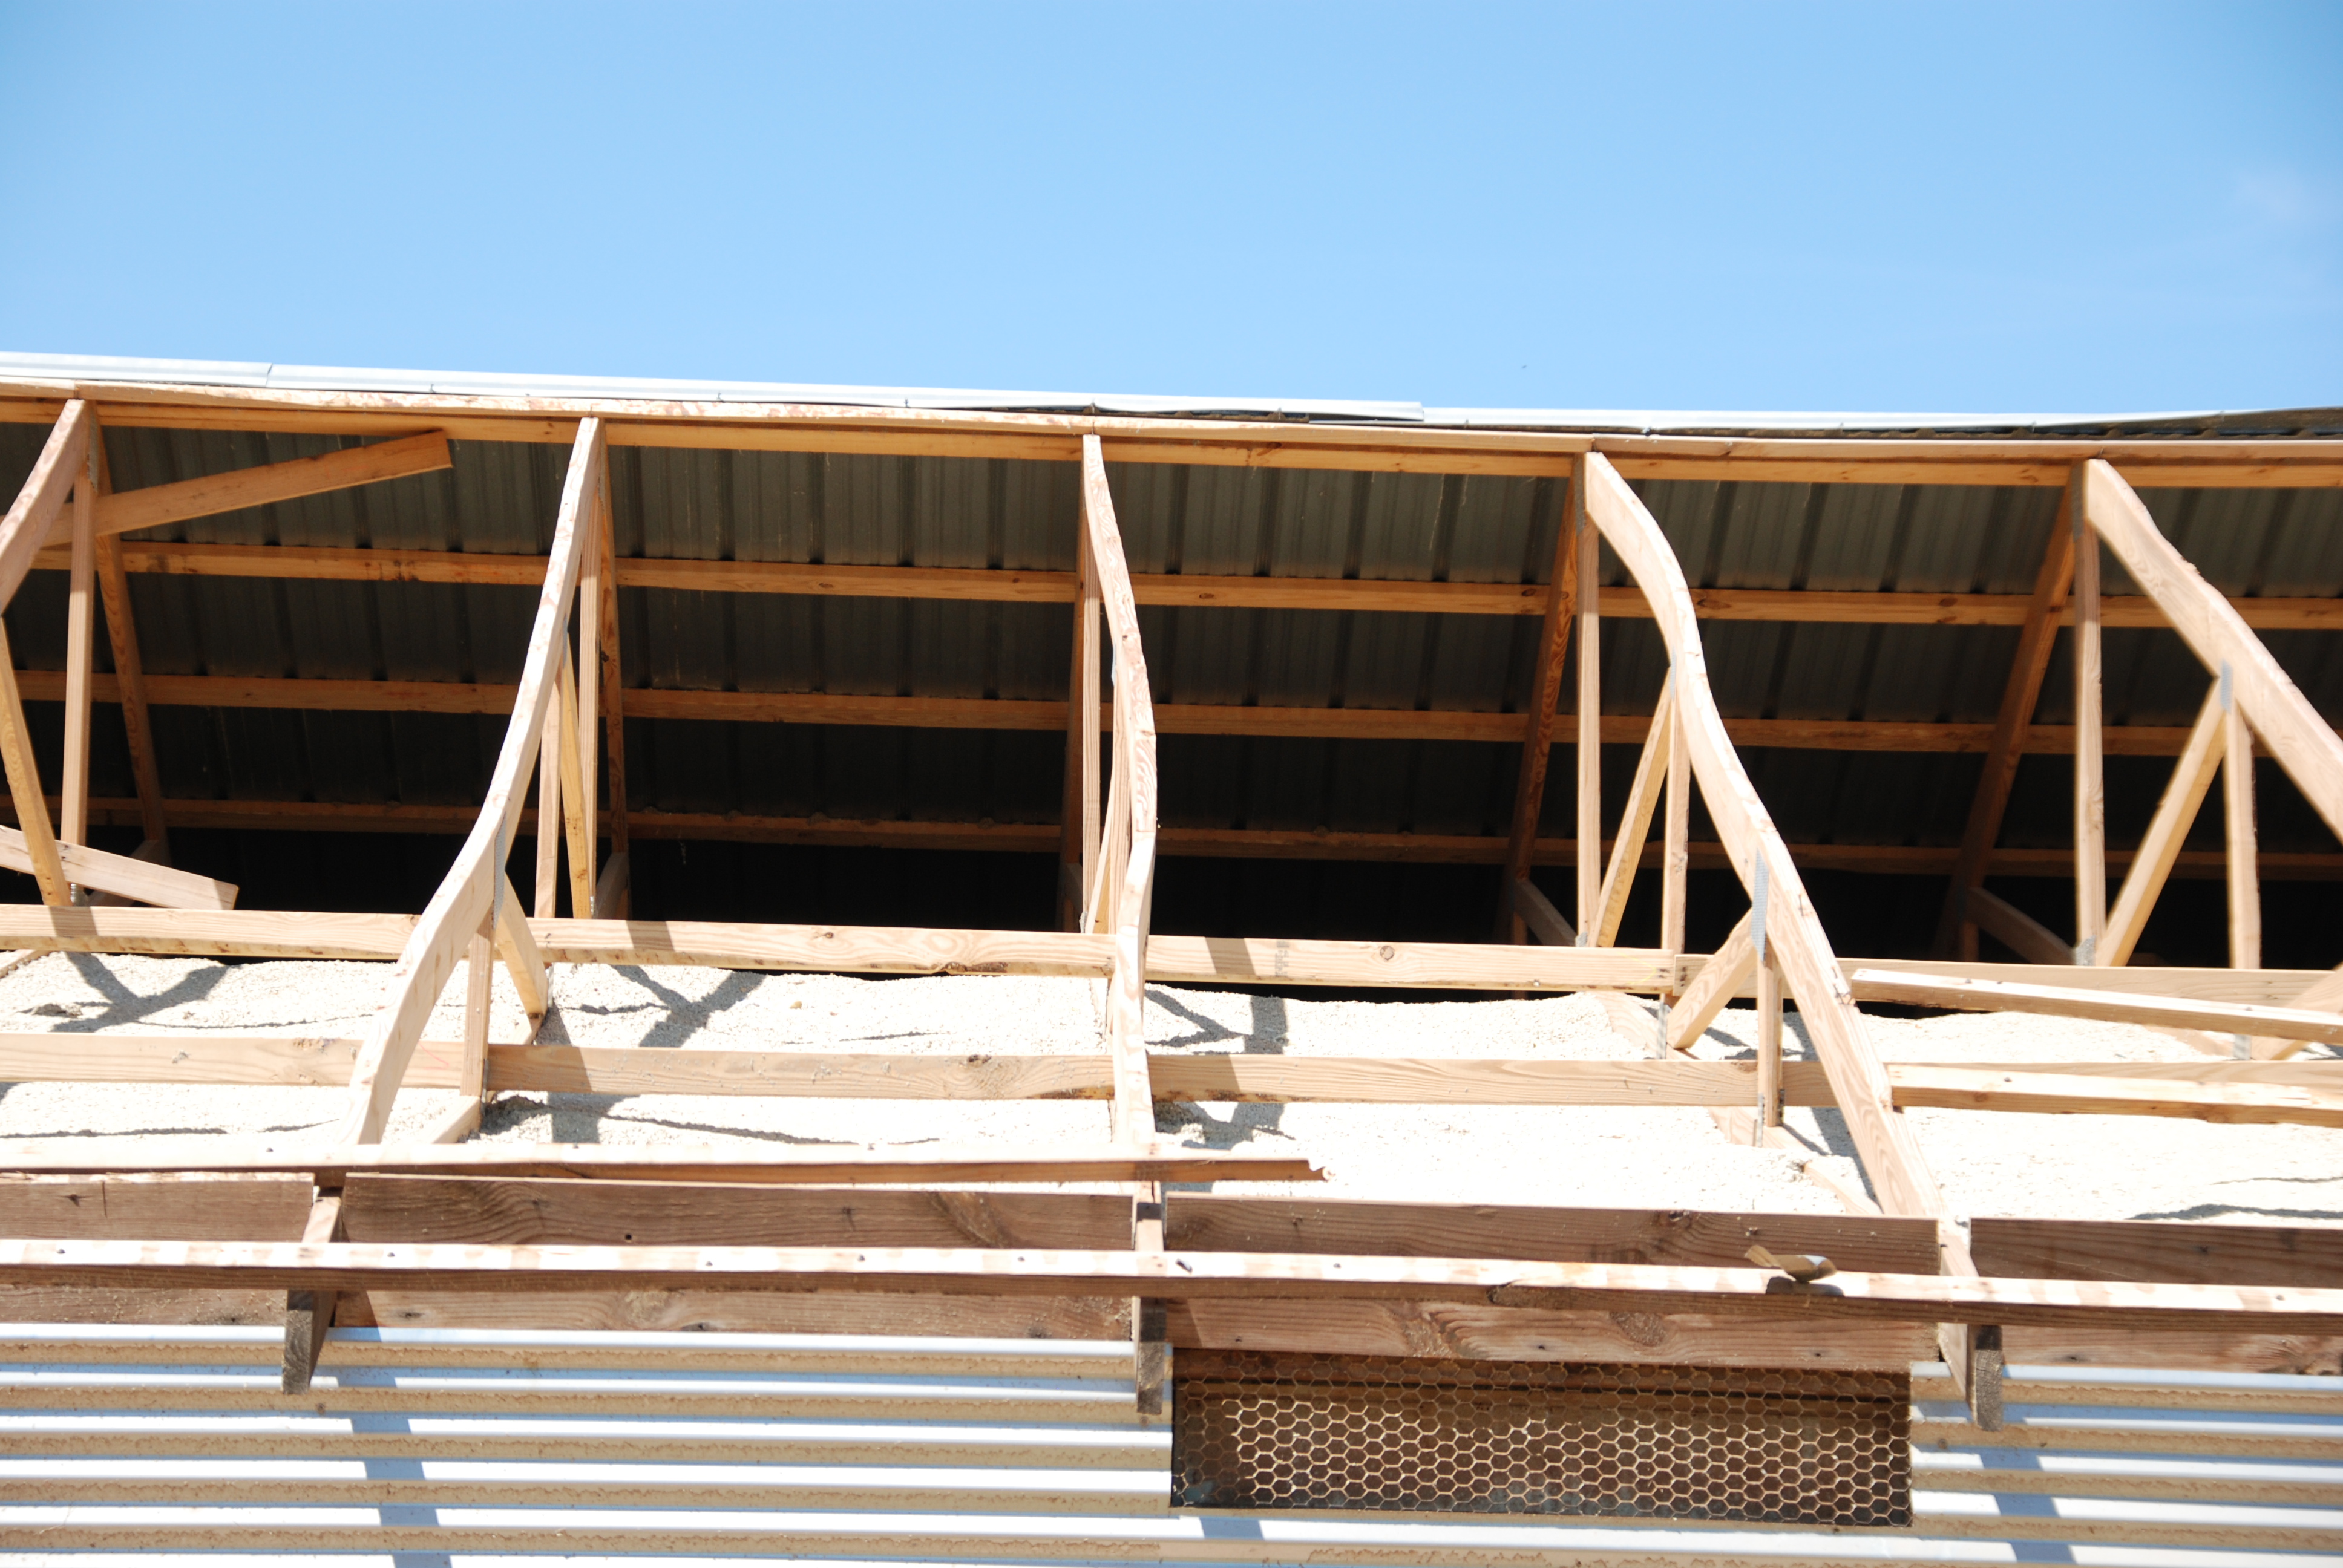 Figure 25. Bracing of trusses is essential to keep trusses vertical and to help carry loads along the length of the house